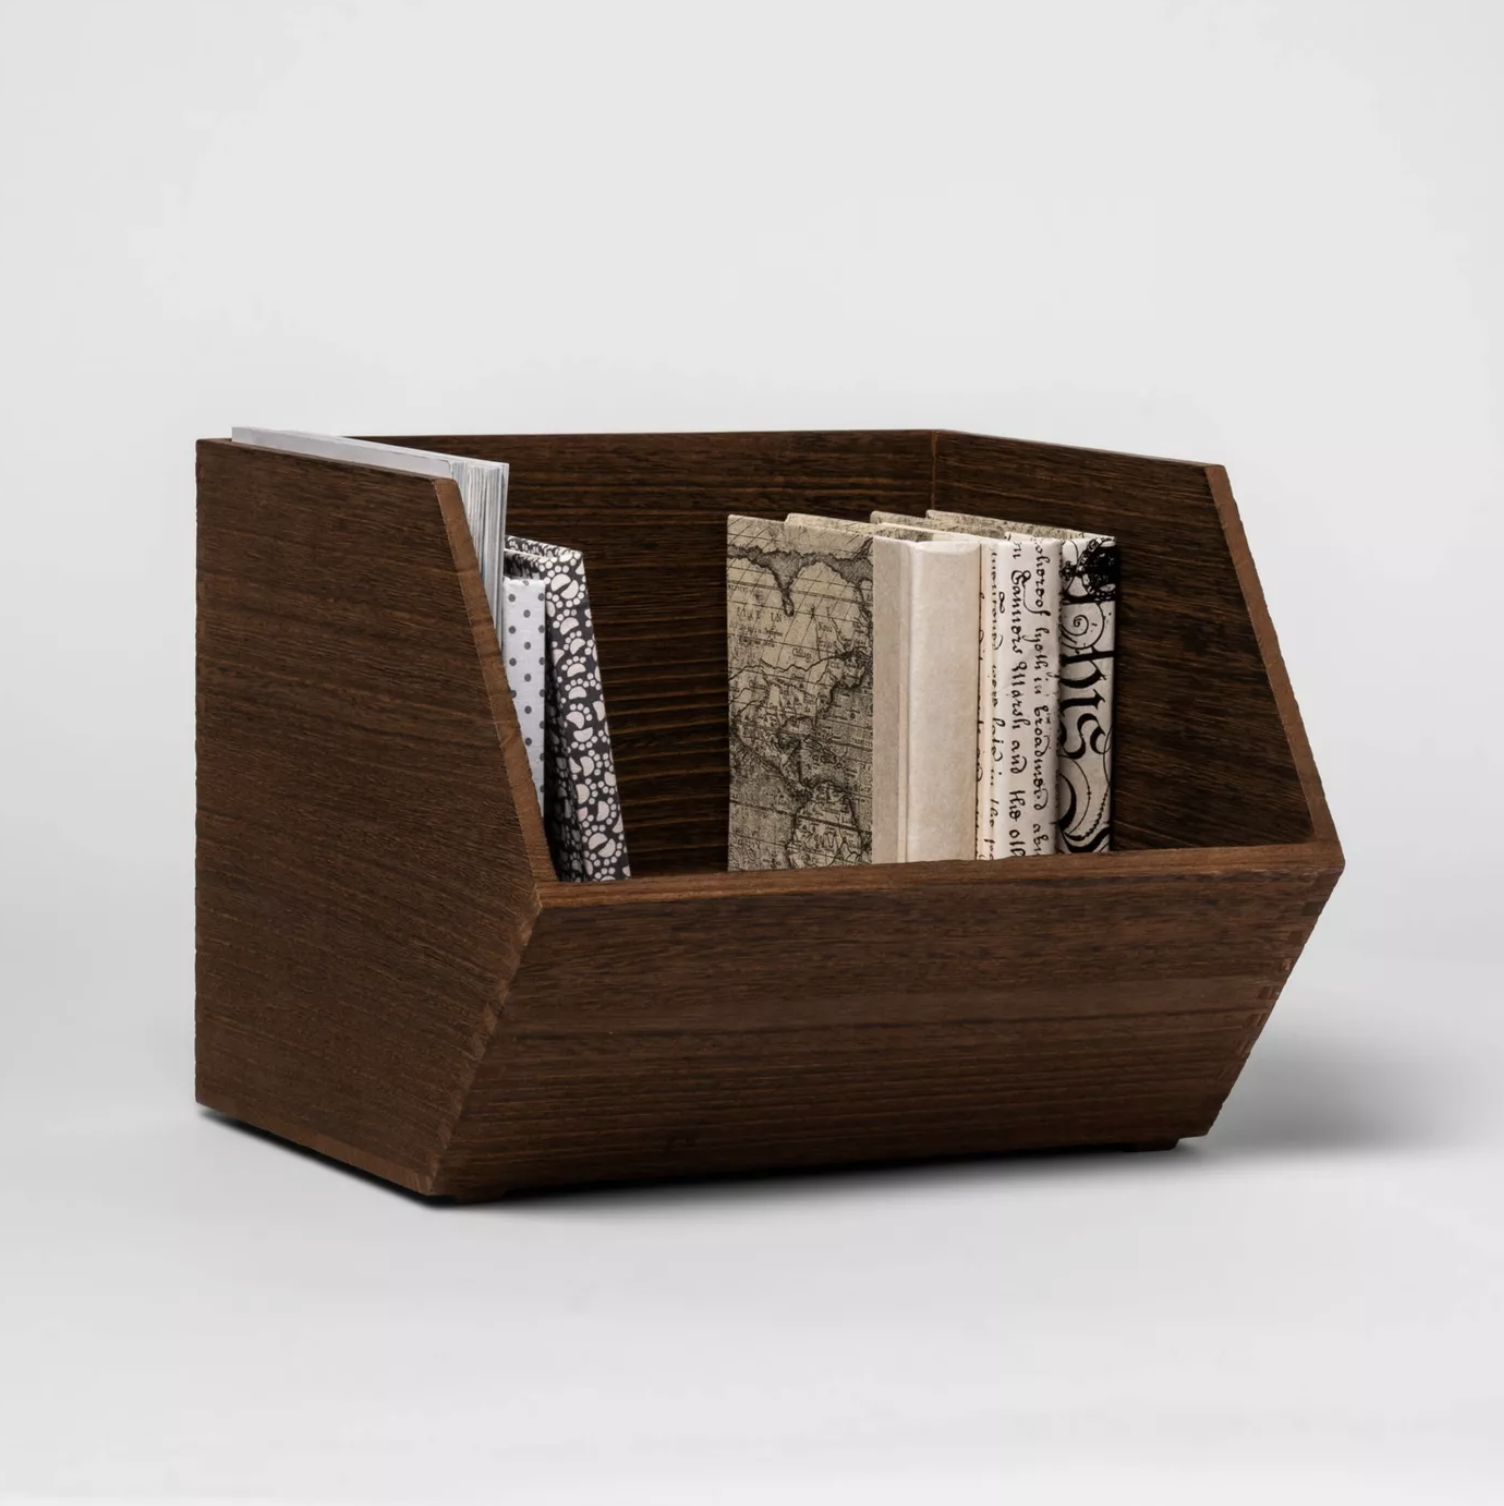 wooden box with books in it